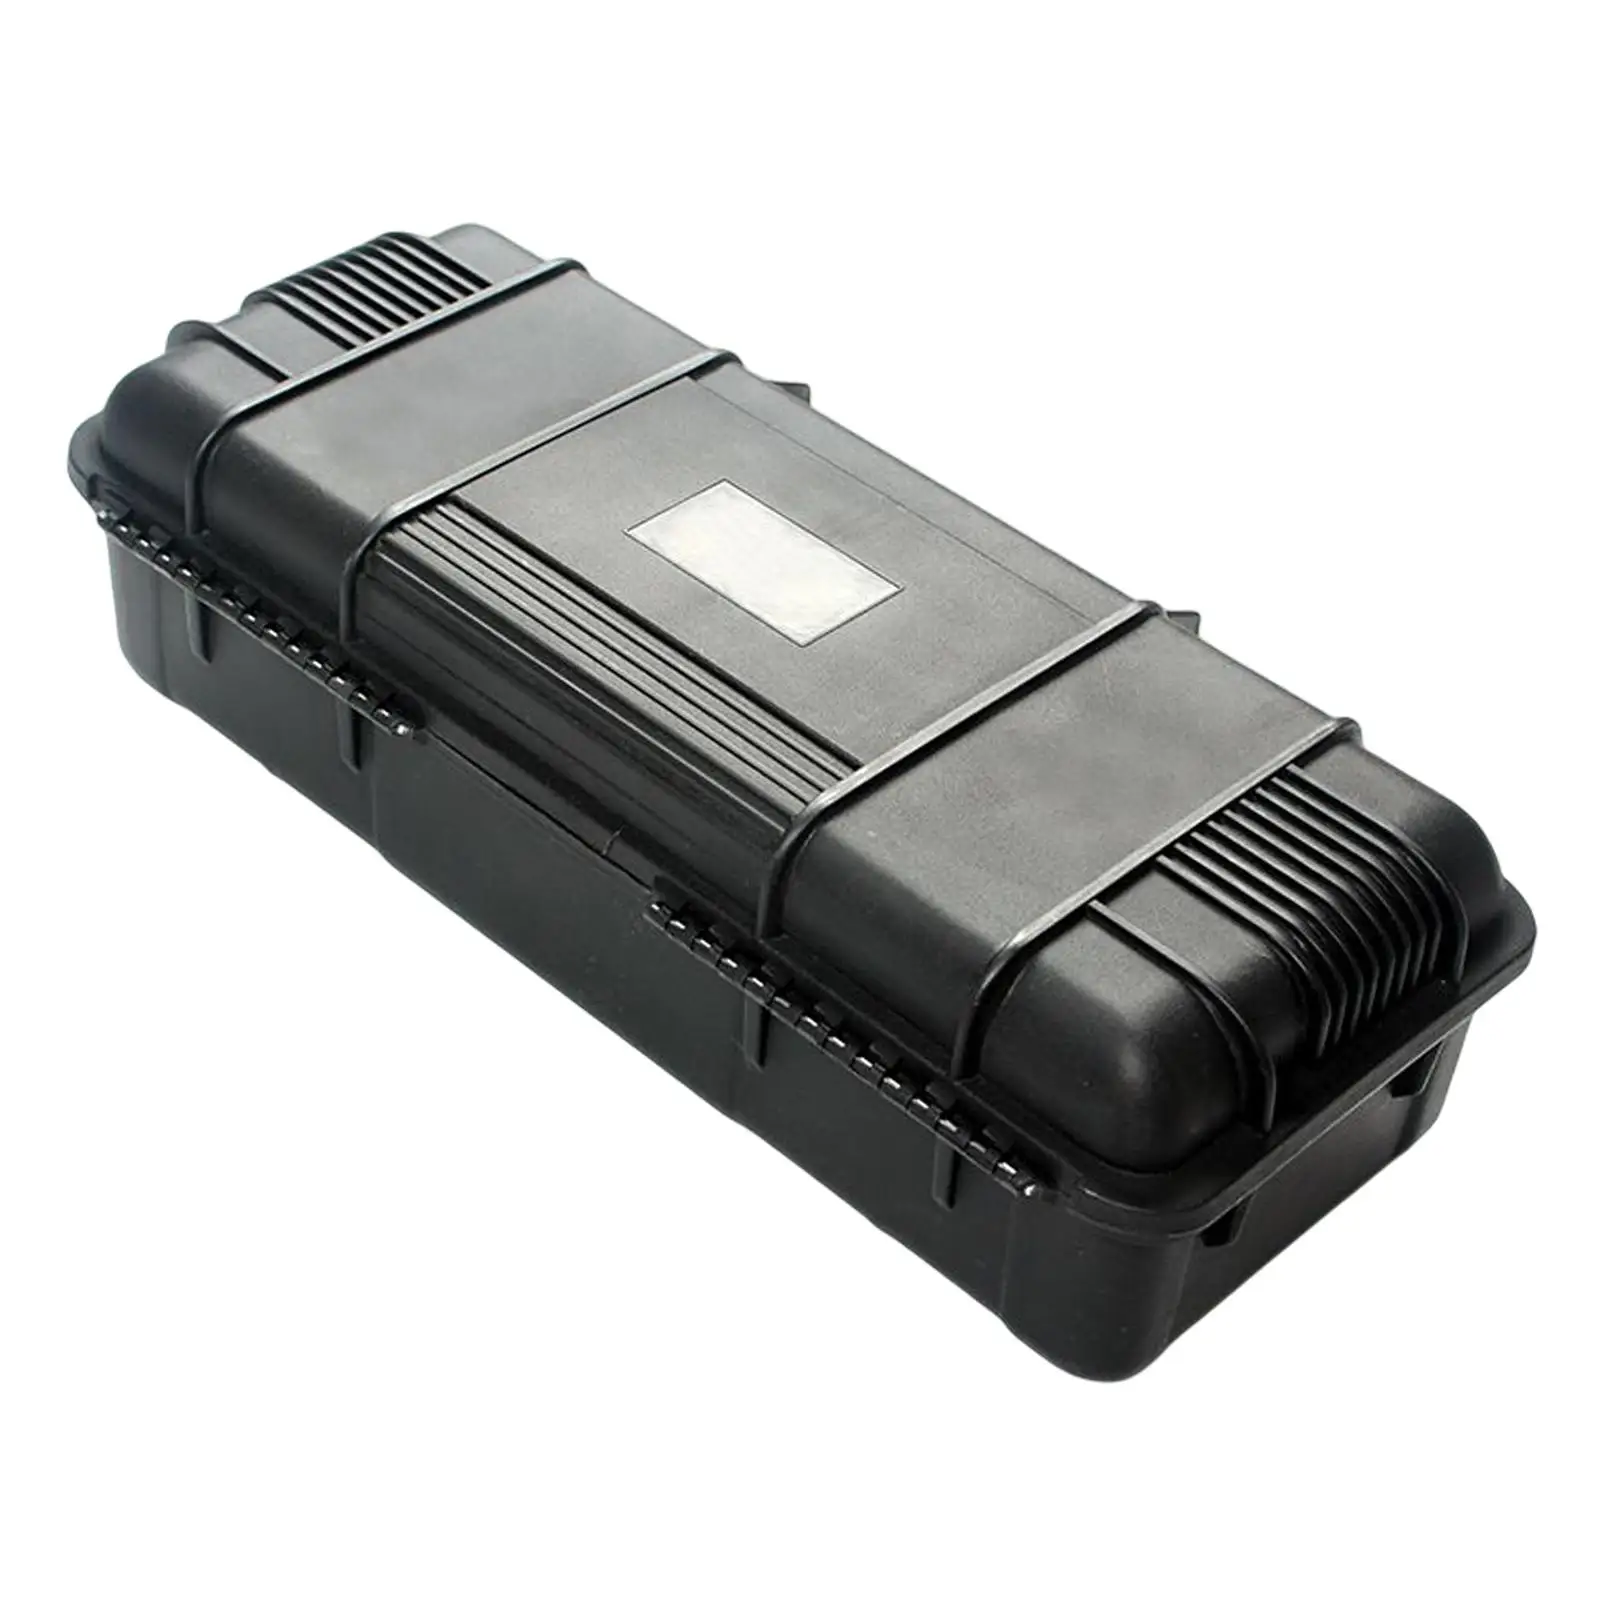 Equipment Tool Box Shockproof Protects Electronics, Tools, Cameras and Testing Equipment GC-4 Toolbox